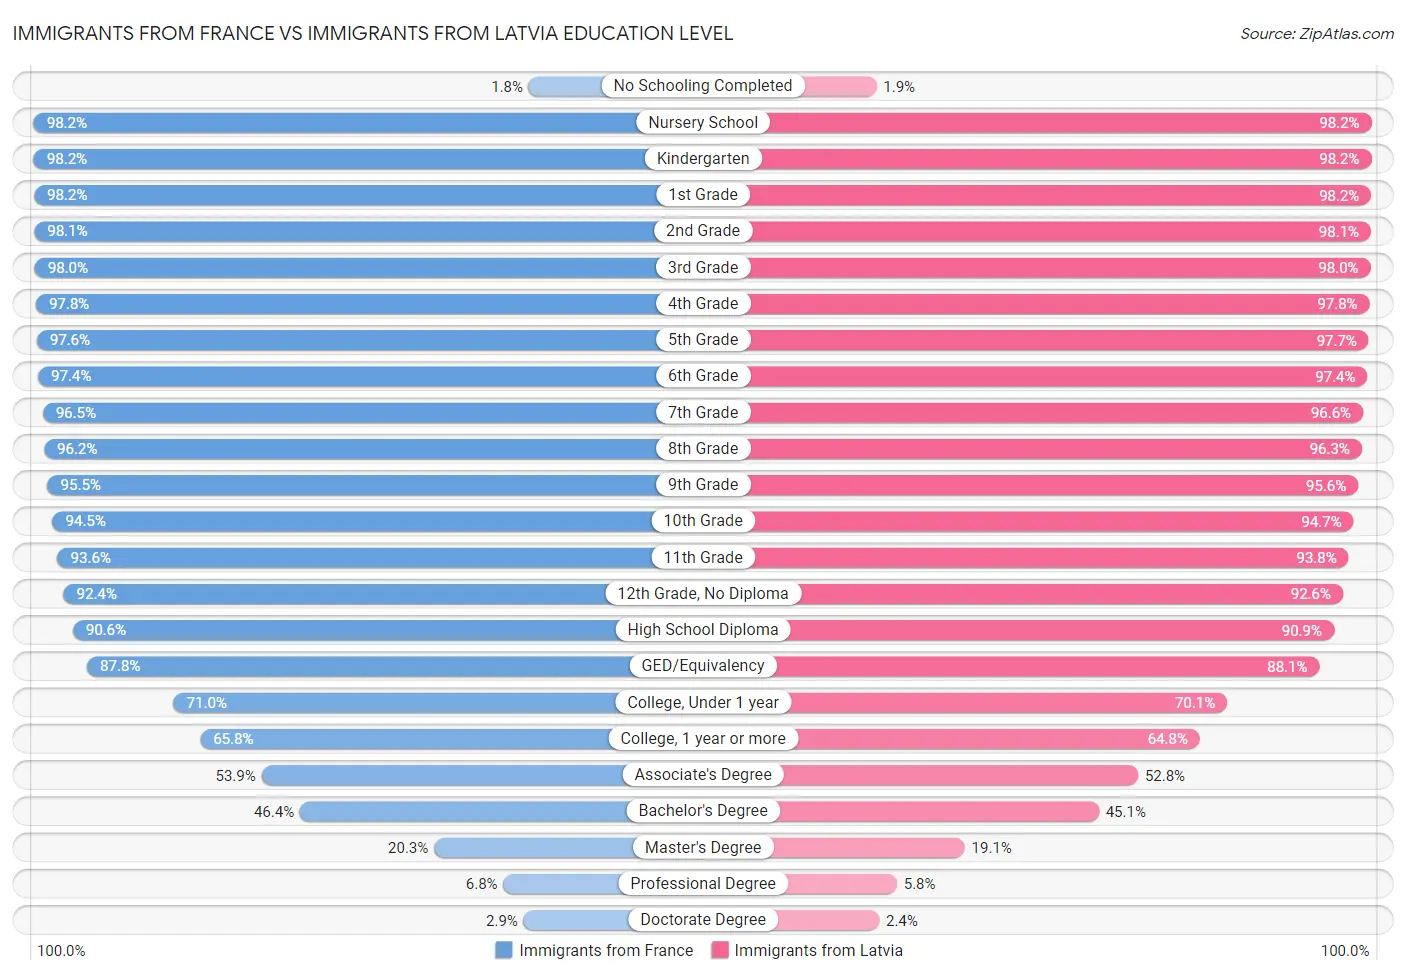 Immigrants from France vs Immigrants from Latvia Education Level